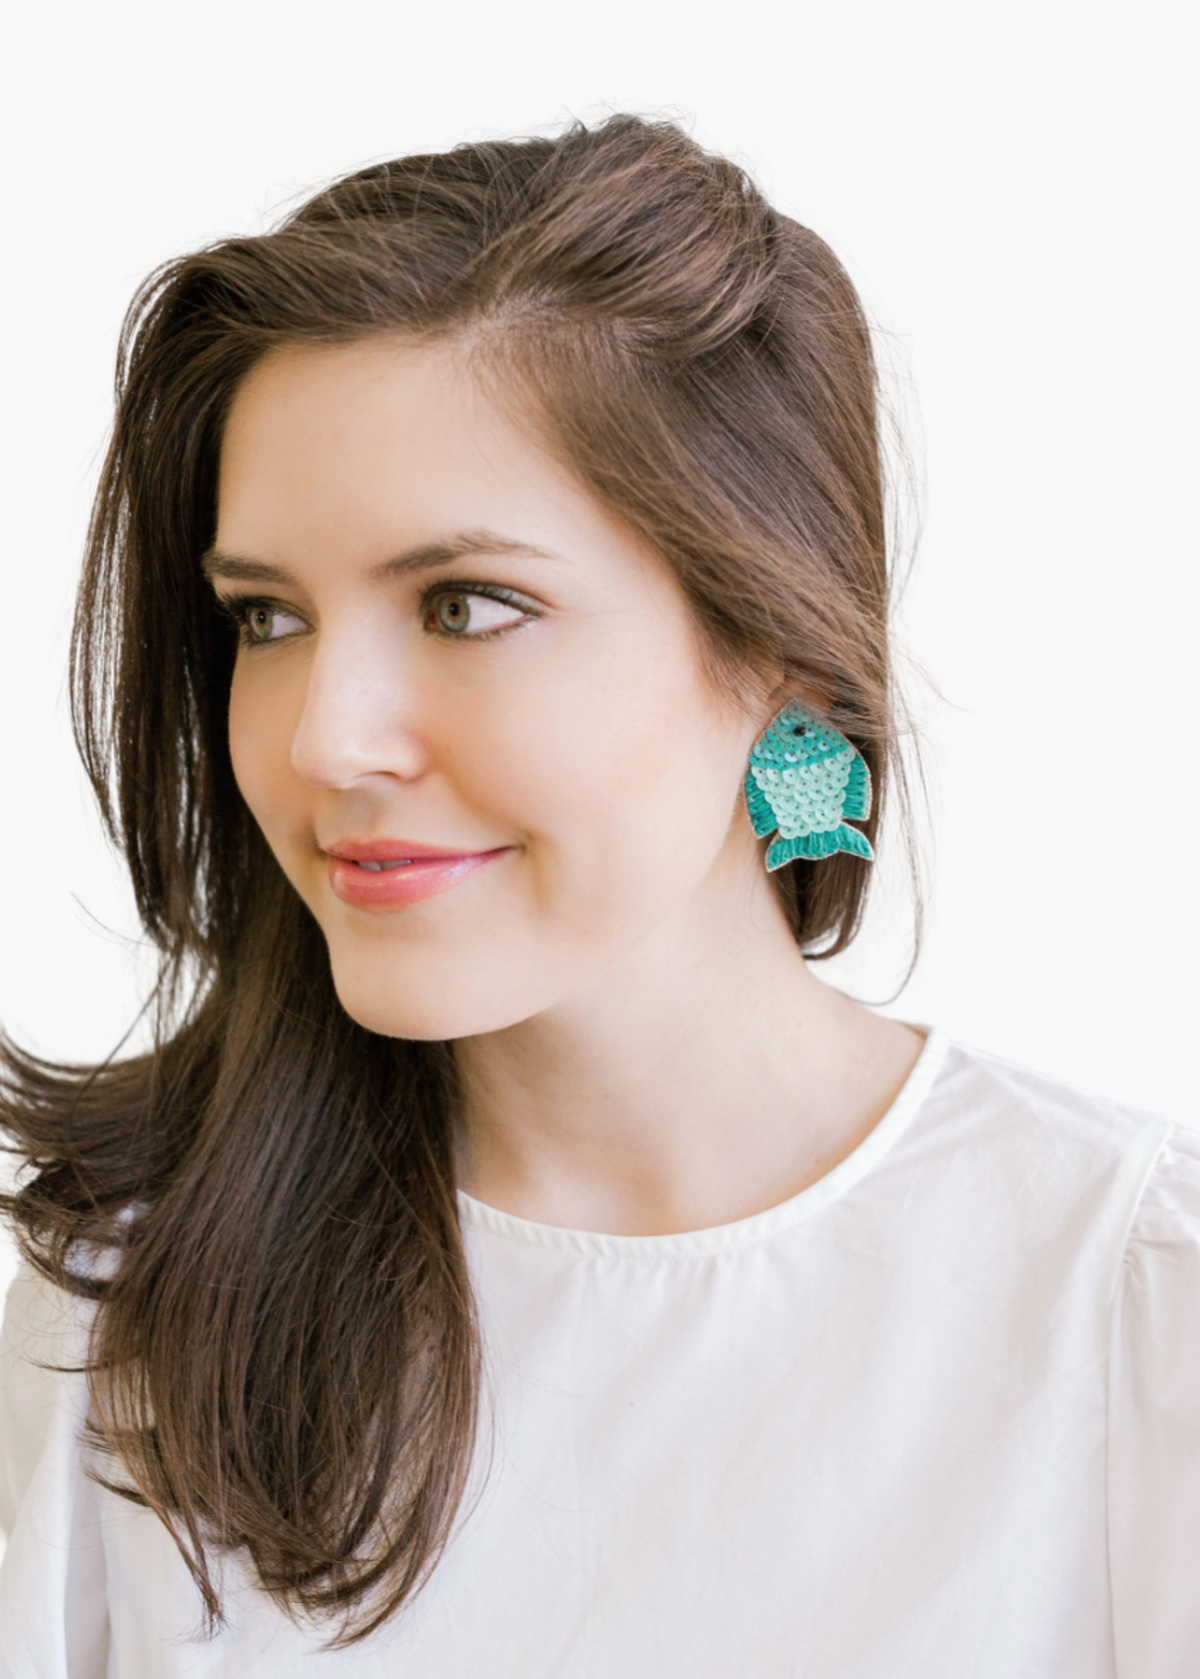 Teal Fish Statement Earring